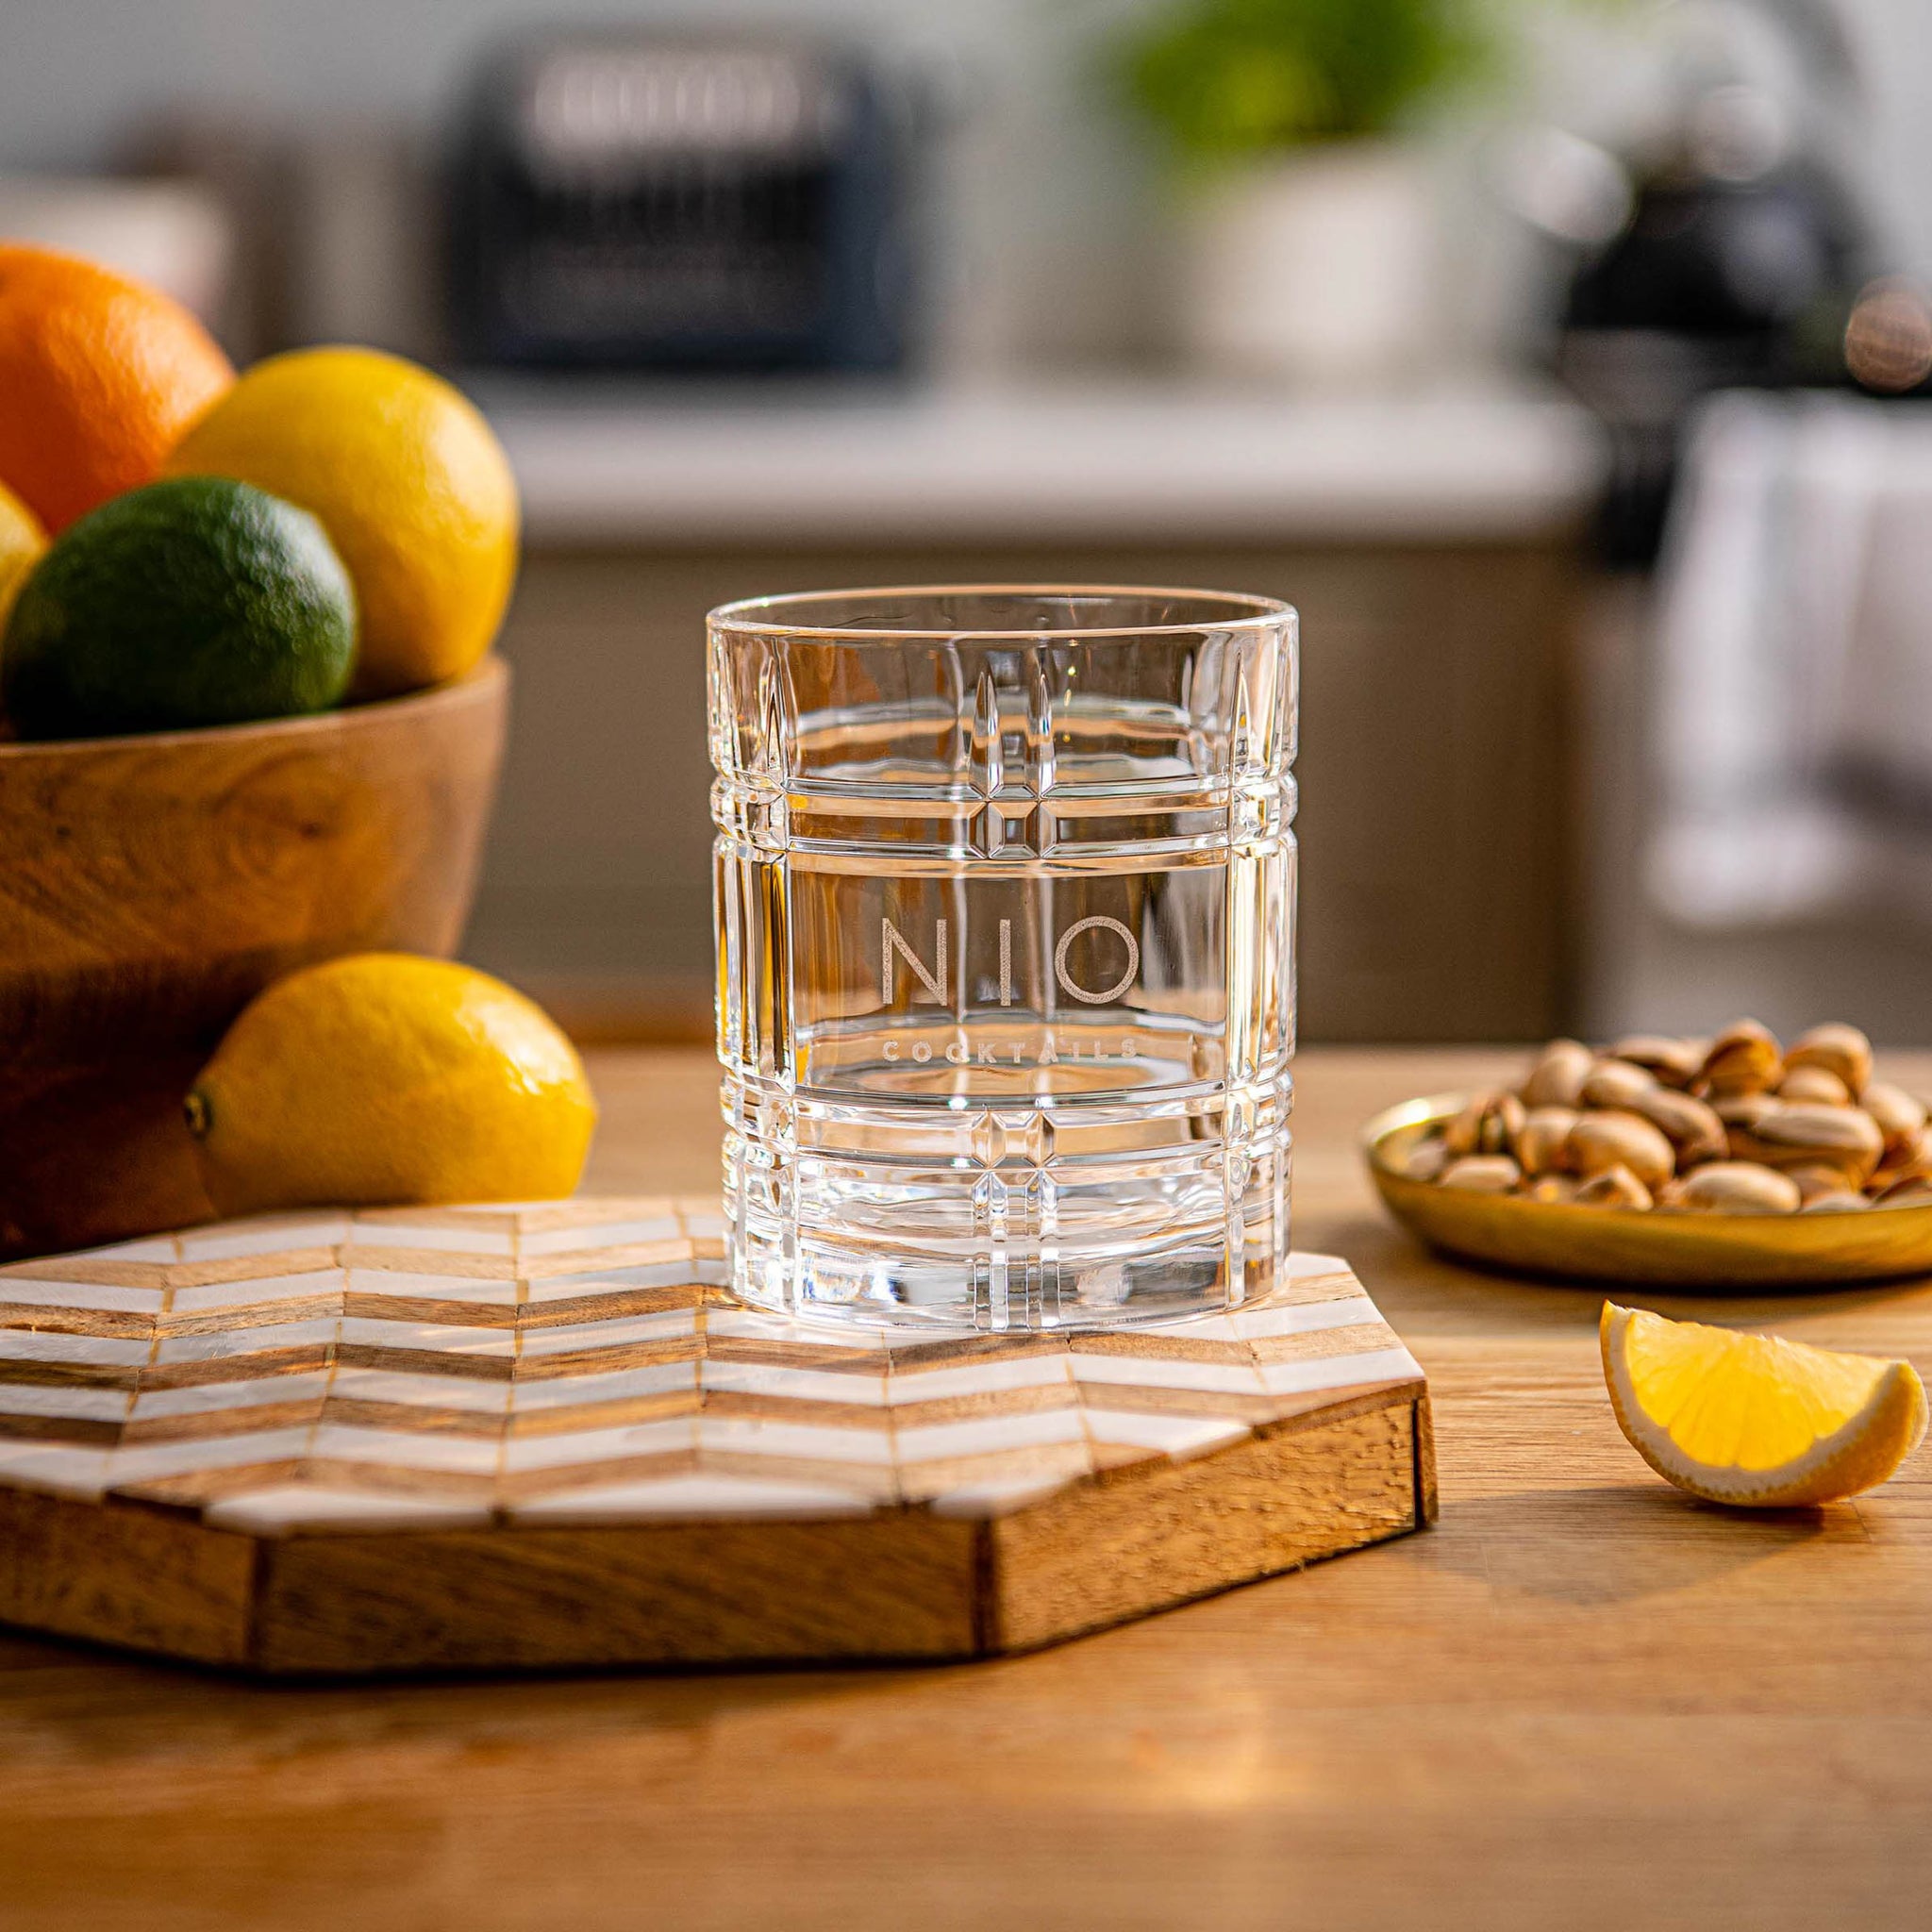 Serve the moment kit: 9 cocktails + 2 tumblers and 1 ice mould FREE (25%)